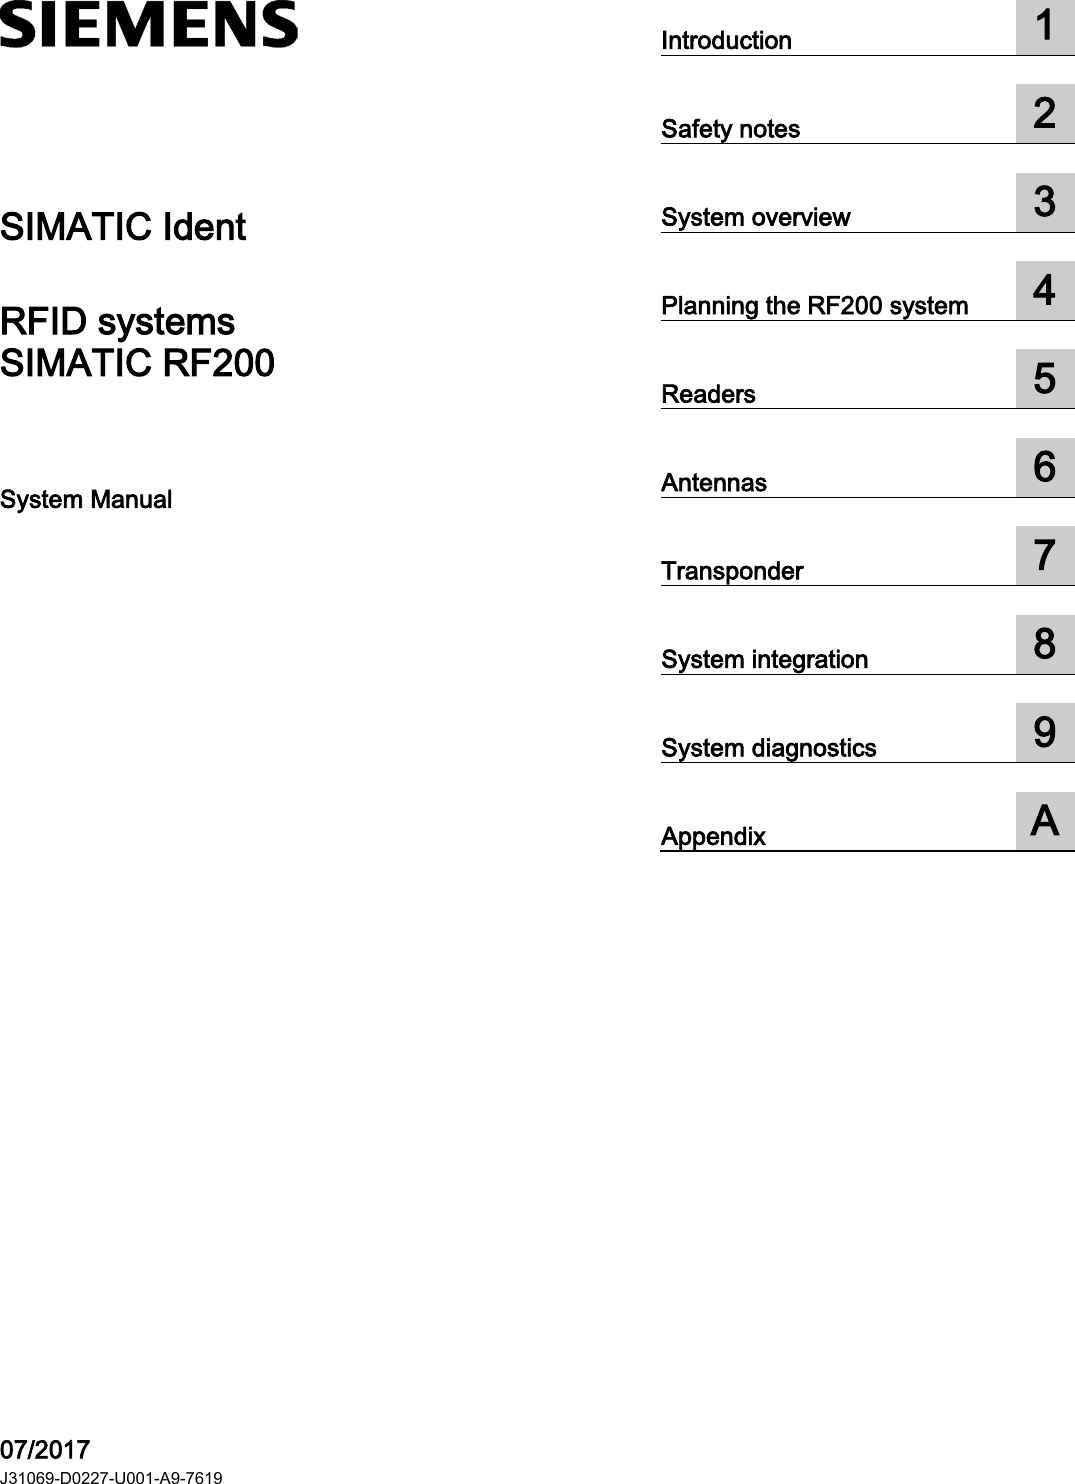     SIMATIC Ident RFID systems SIMATIC RF200 System Manual   07/2017 J31069-D0227-U001-A9-7619 Introduction  1  Safety notes  2  System overview  3  Planning the RF200 system  4  Readers  5  Antennas  6  Transponder  7  System integration  8  System diagnostics  9  Appendix  A 